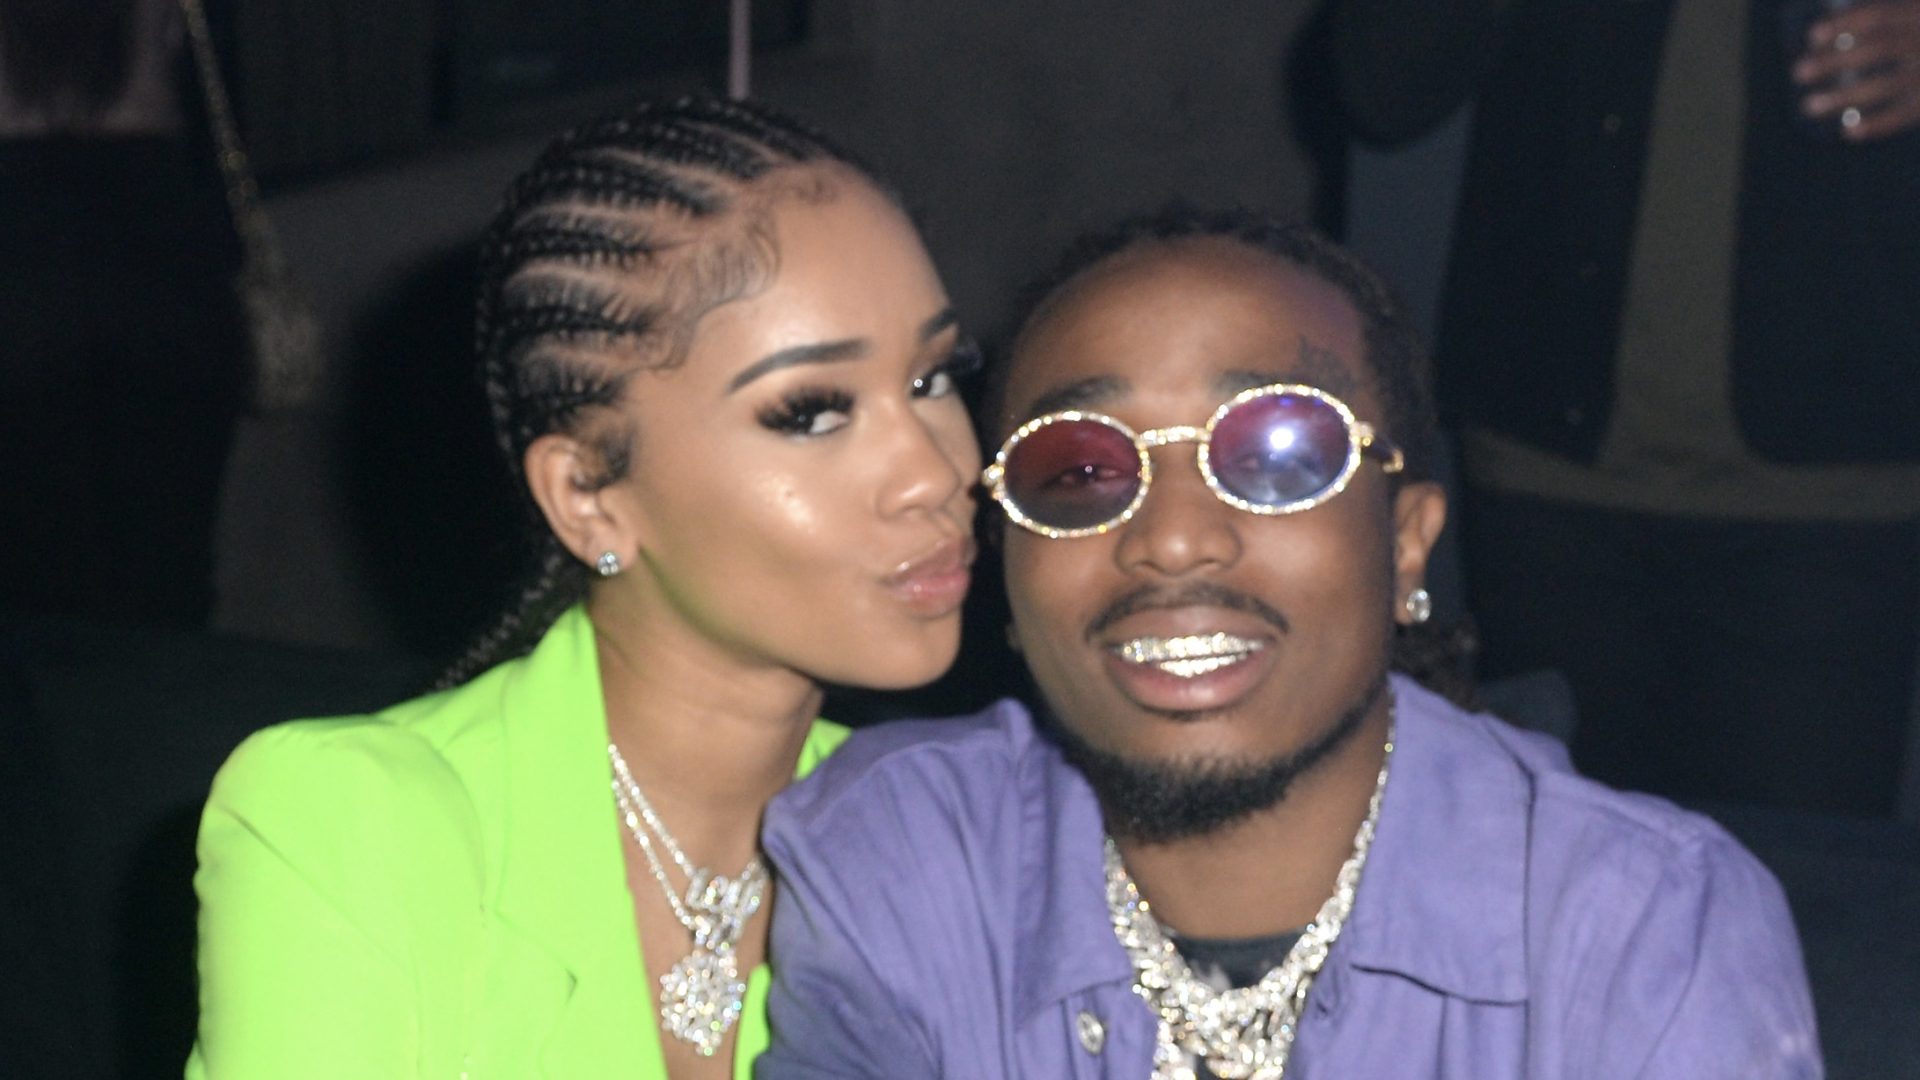 LOS ANGELES, CALIFORNIA - APRIL 10: Saweetie and Quavo attend the boohooMAN x Quavo Launch Party at The Sunset Room on April 10, 2019 in Los Angeles, California.